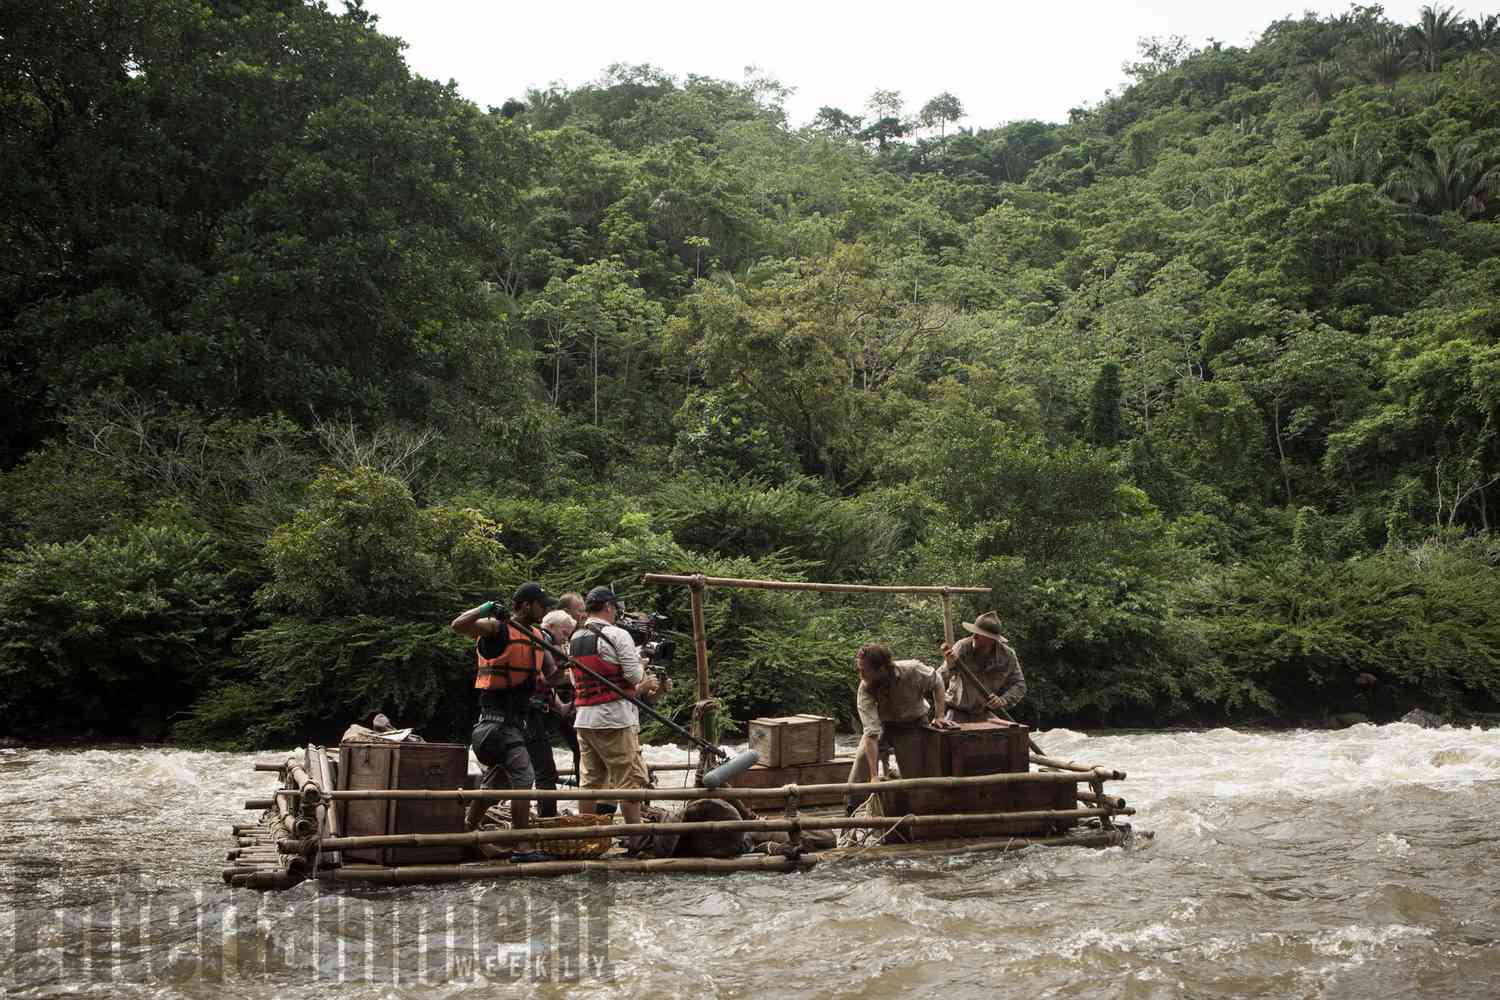 A smaller crew captures the action on the river during filming&nbsp;